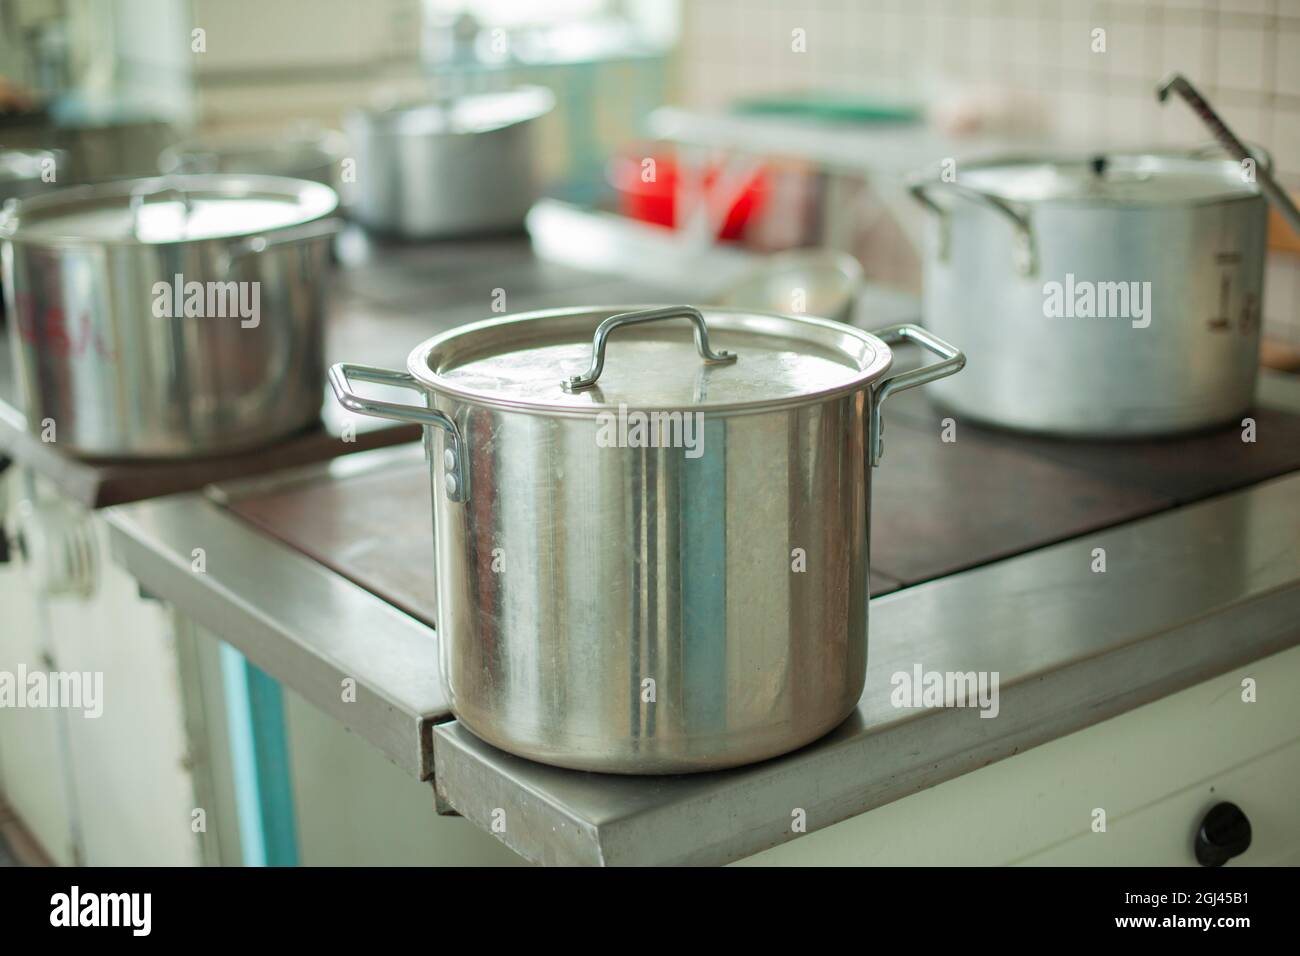 https://c8.alamy.com/comp/2GJ45B1/large-pot-for-cooking-kitchen-utensils-in-the-dining-room-stainless-steel-water-tank-dishes-in-the-kitchen-2GJ45B1.jpg